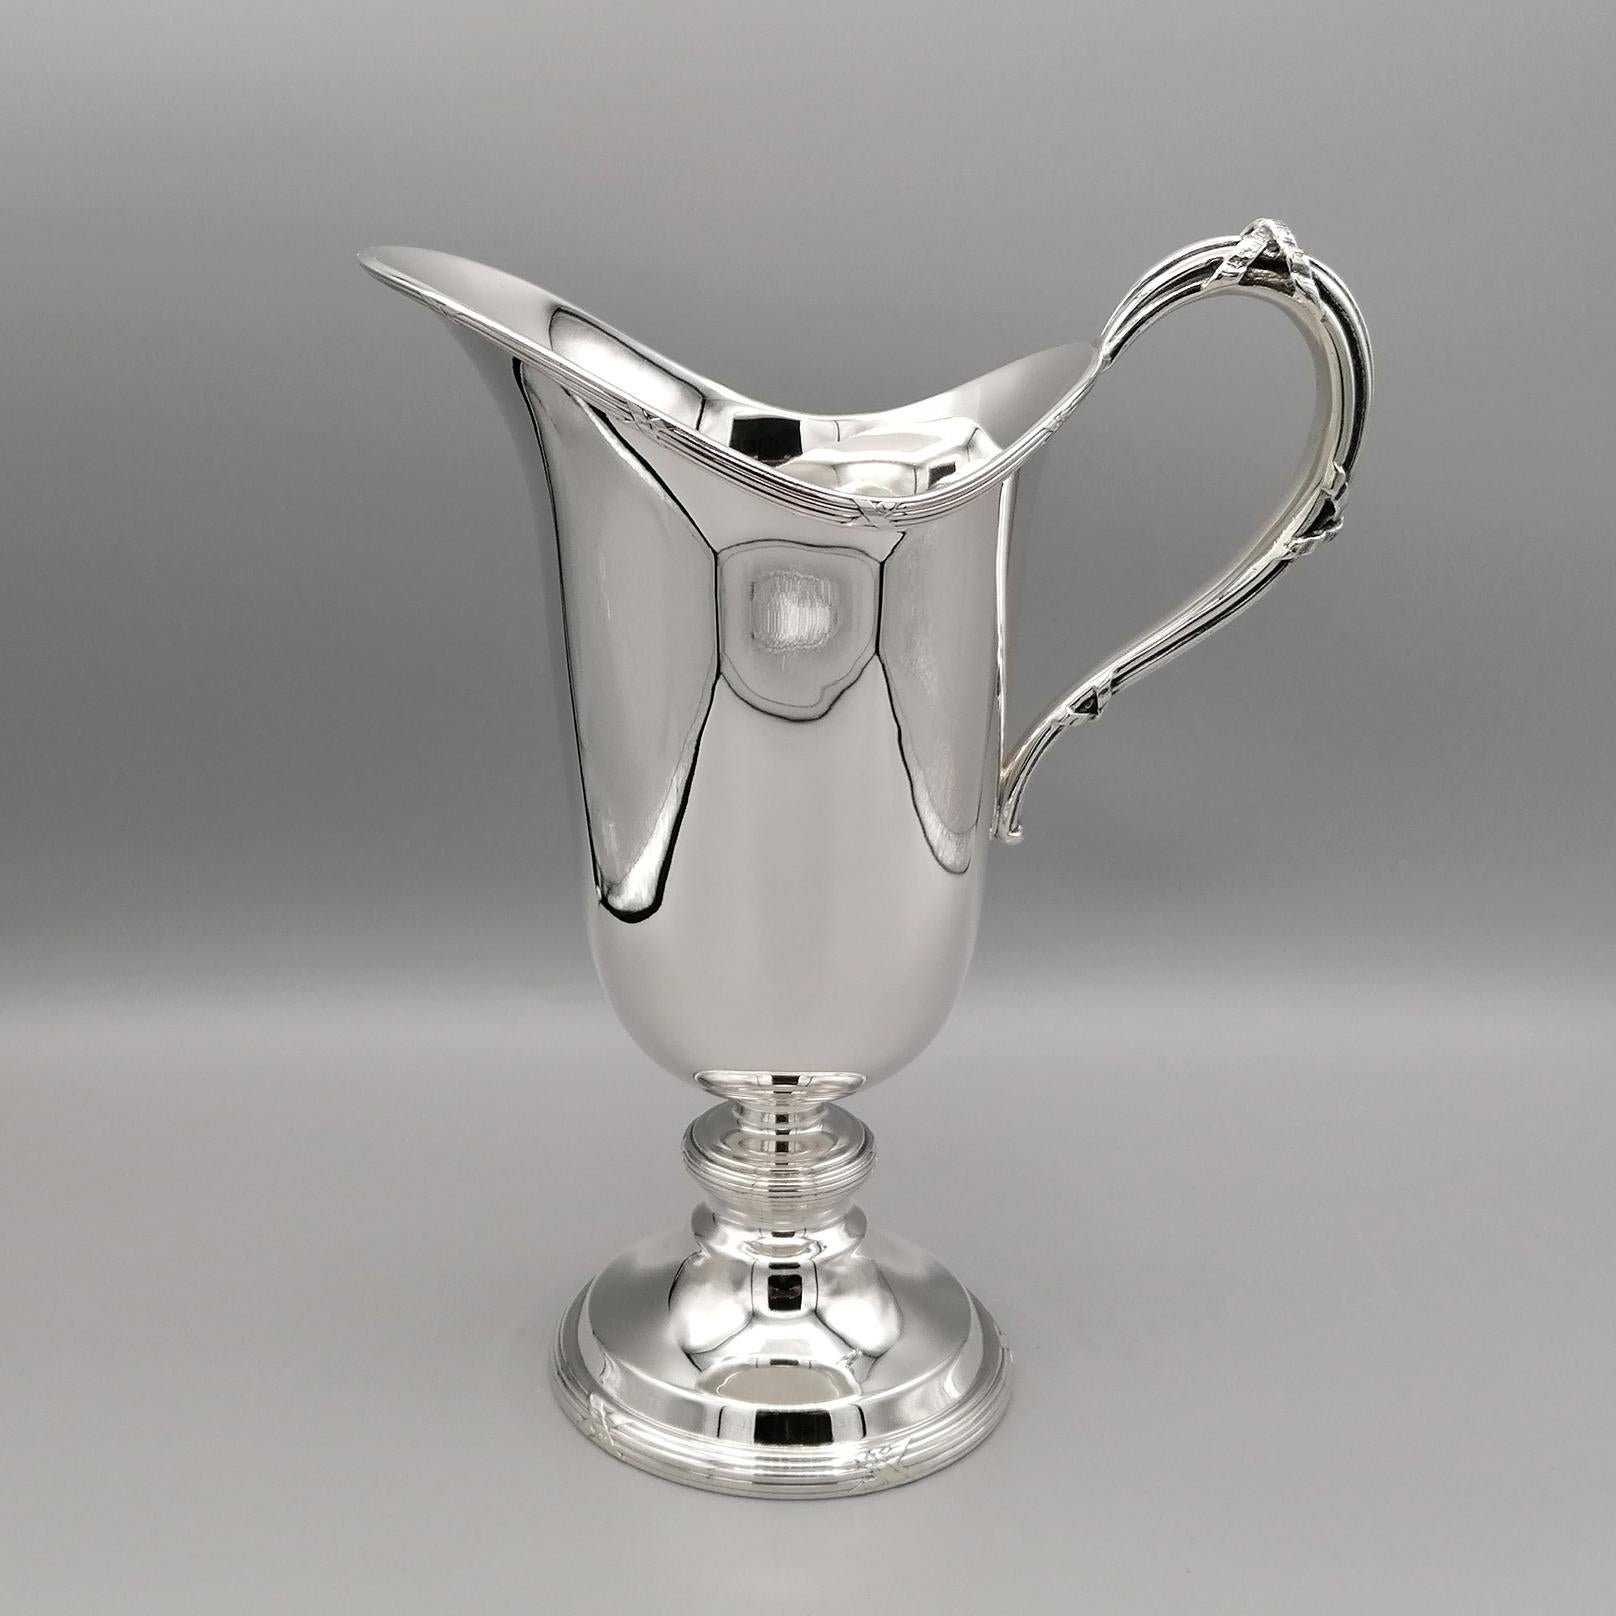 Italian Louis XVI style sterling silver carafe made by Gianmaria Buccellati.
The body of the carafe is smooth and supported by a round base with a Louis XVI edge.
The edge with cross ribbon characterizes the Classic Luis XVI style has also been